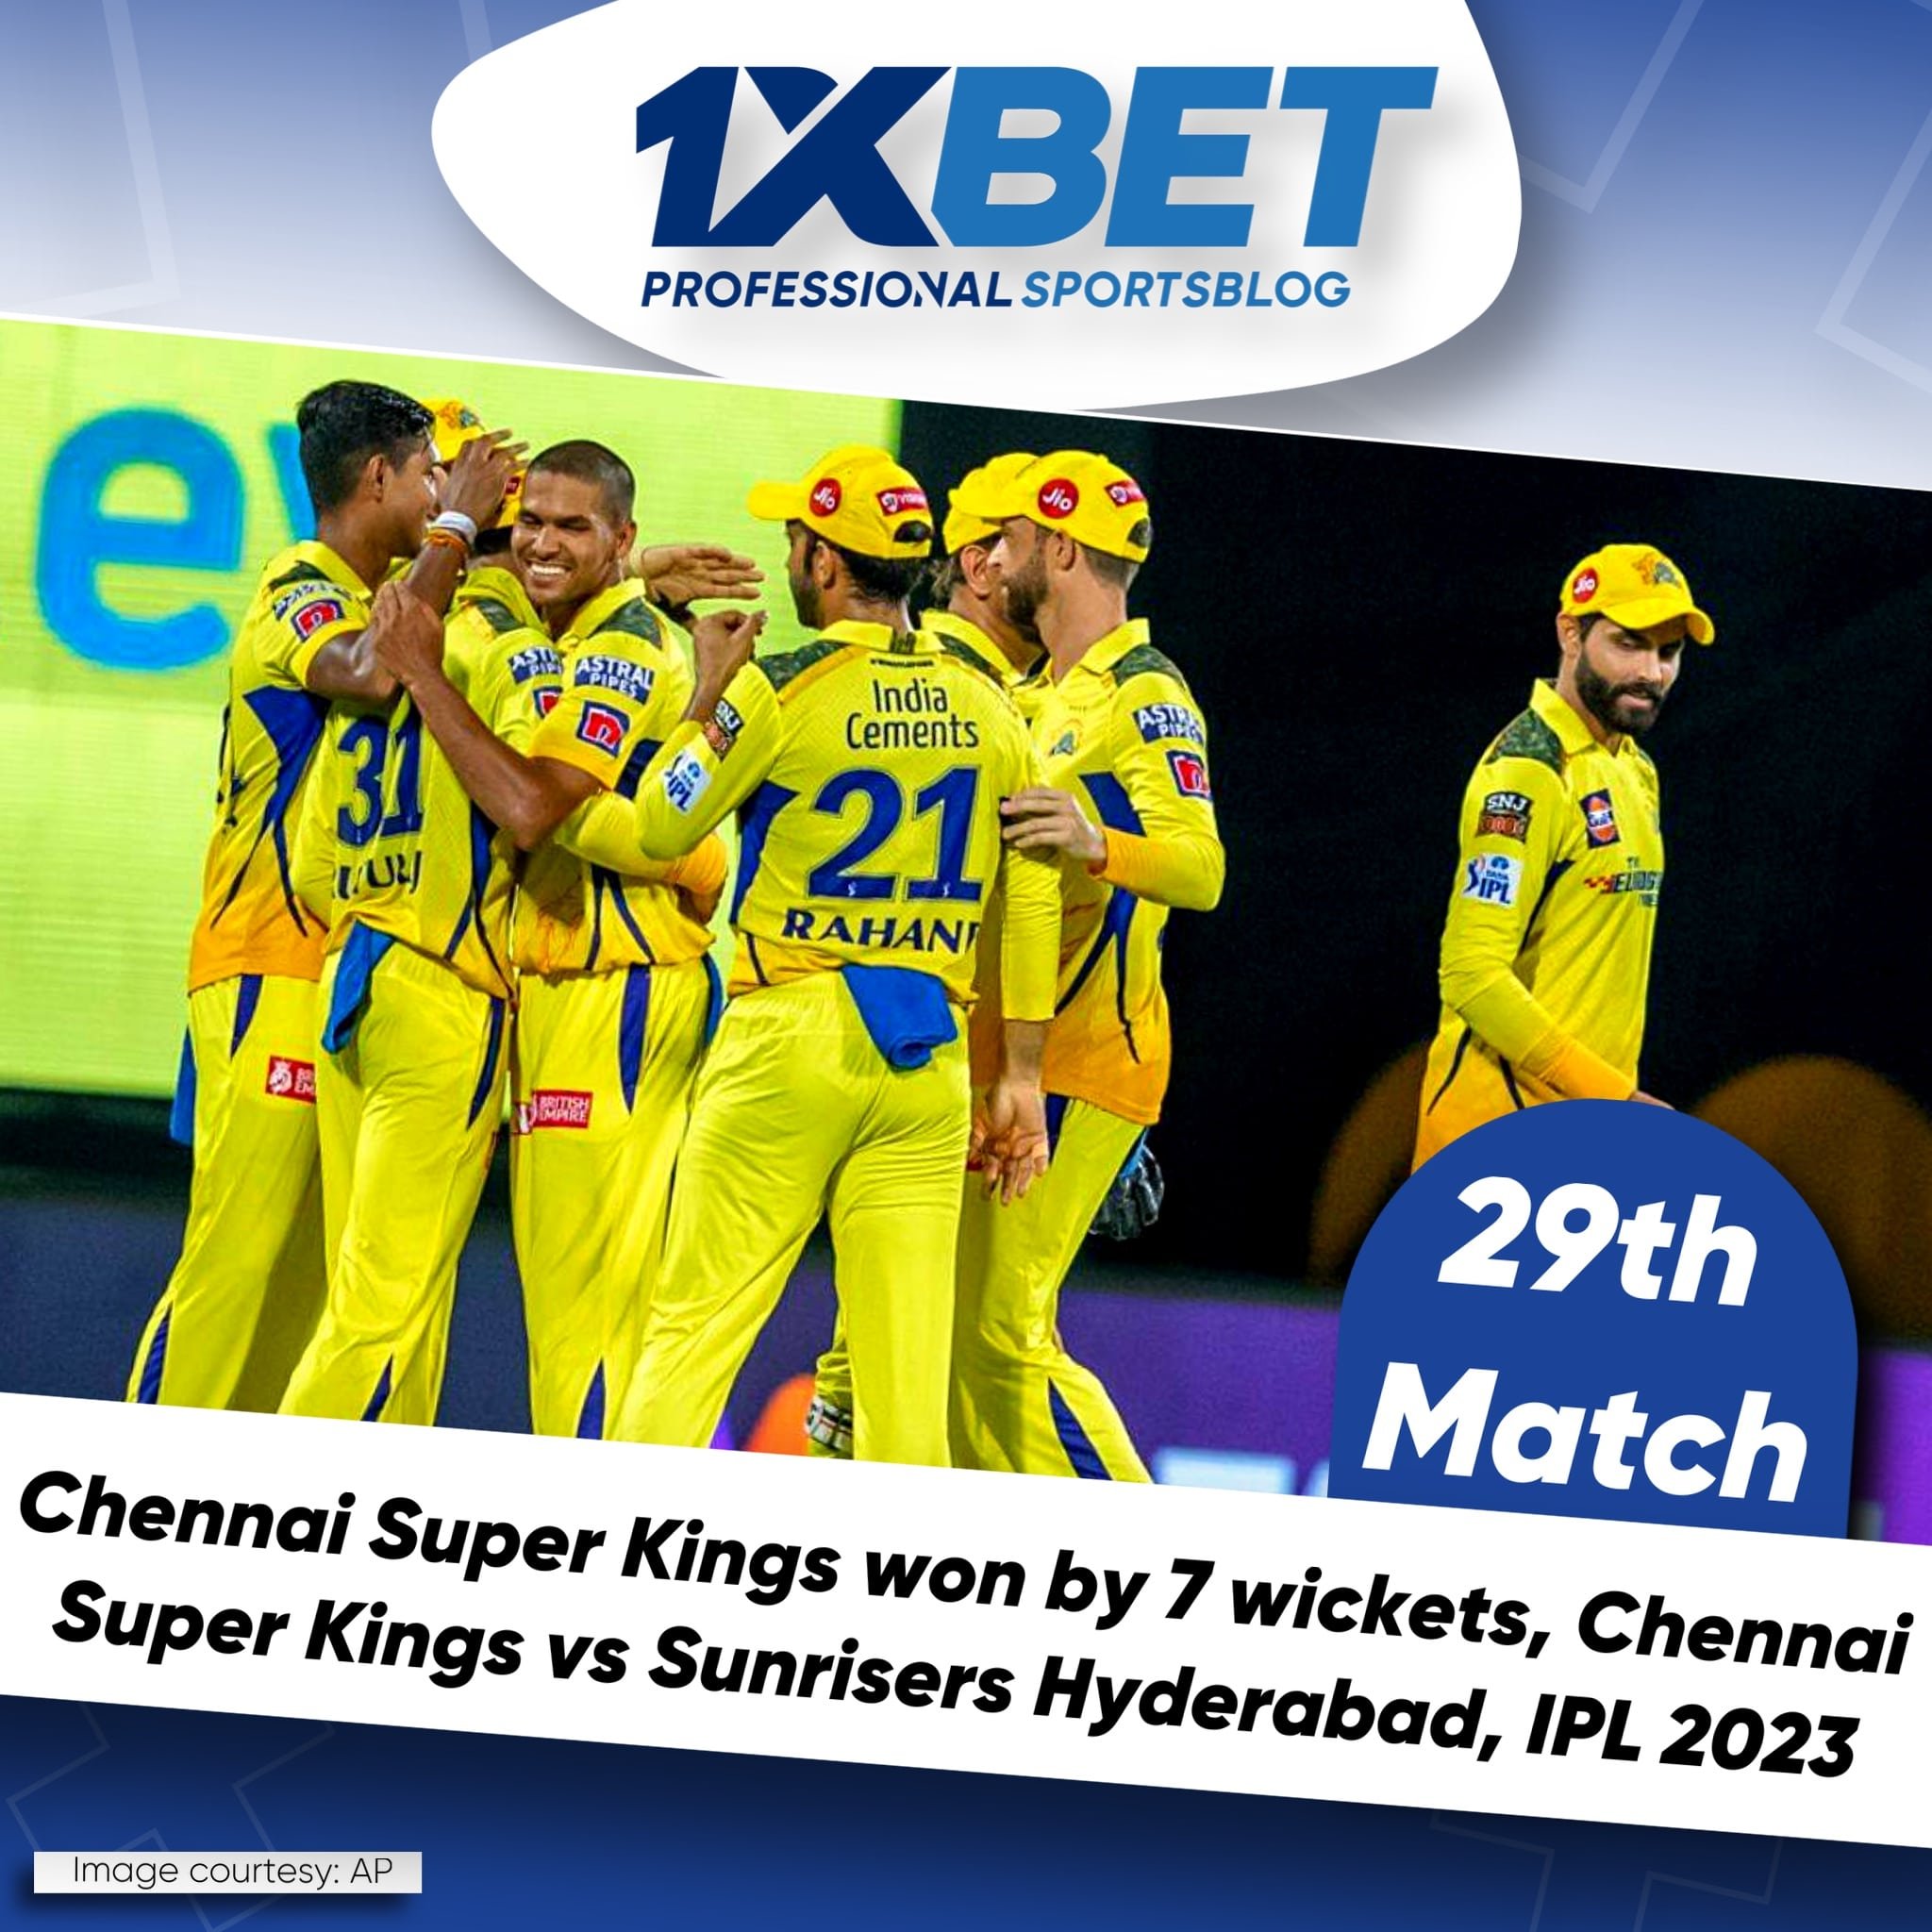 Chennai Super Kings won by 7 wickets